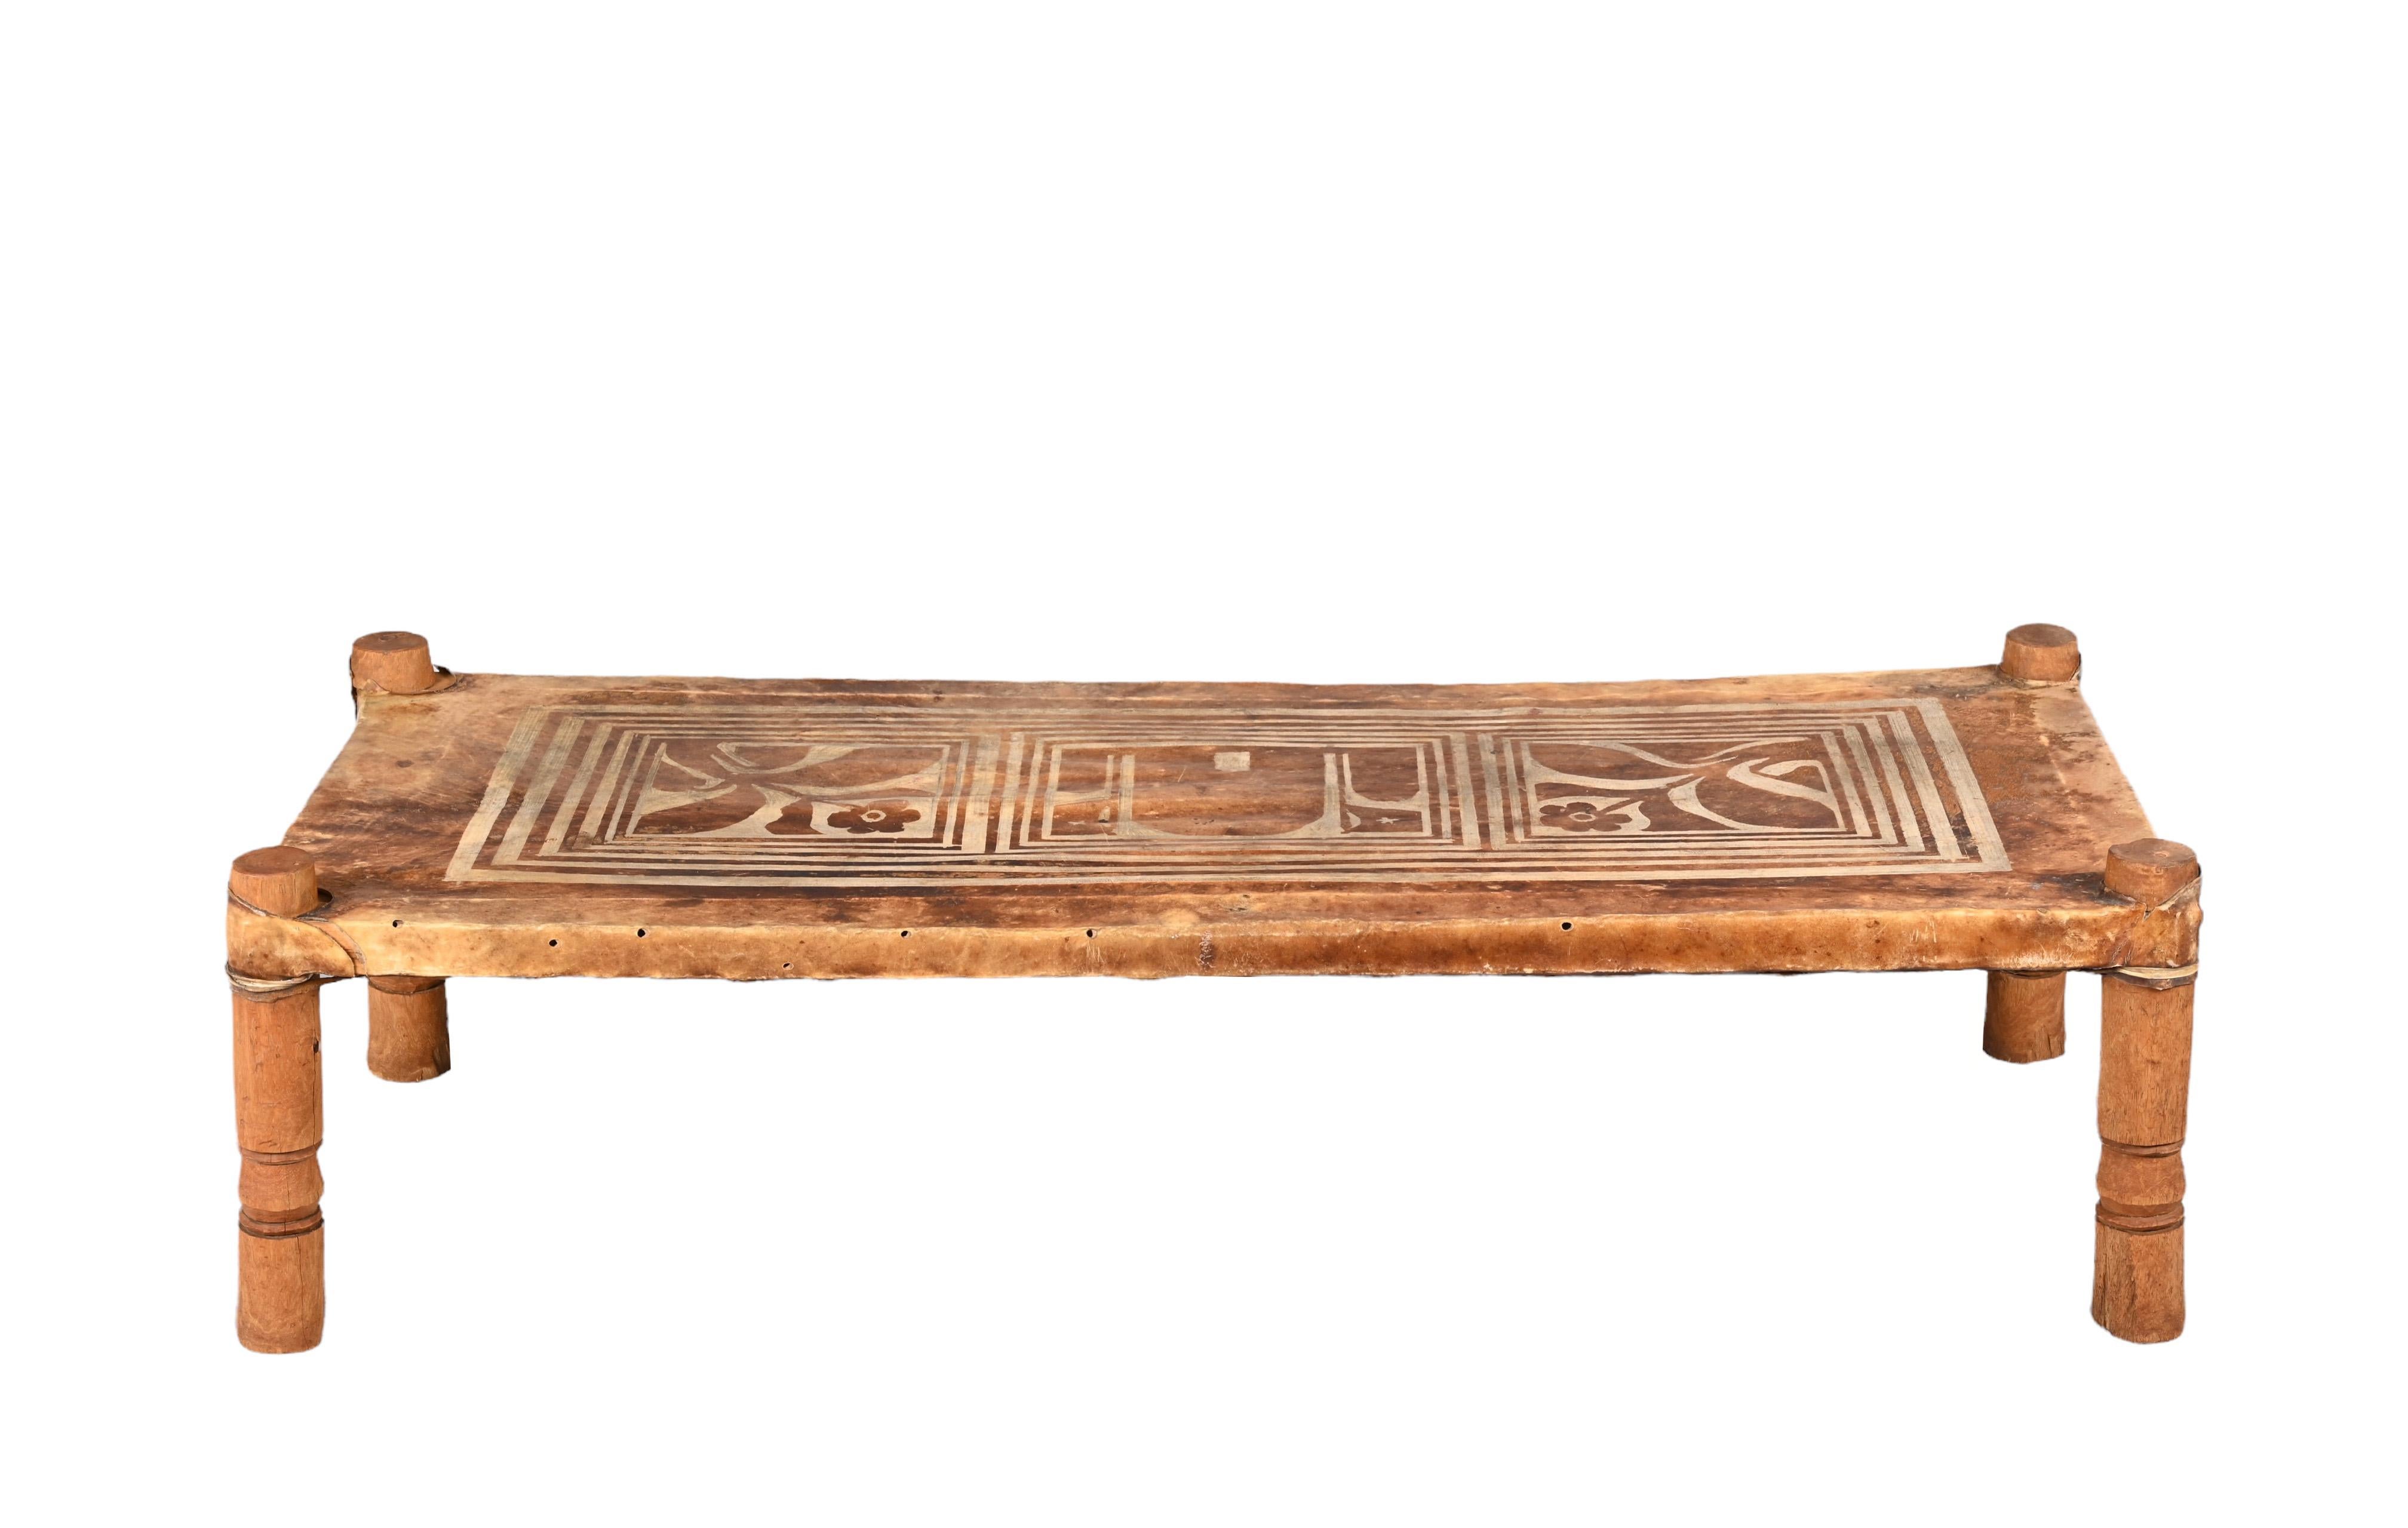 Fantastic Mid-Century Modern leather and wood rectangular coffee table or bench. This wonderful item was designed in Italy during the 1950s.

This unique piece features a light brown top in leather with fantastic tribal decorations, two flowers on